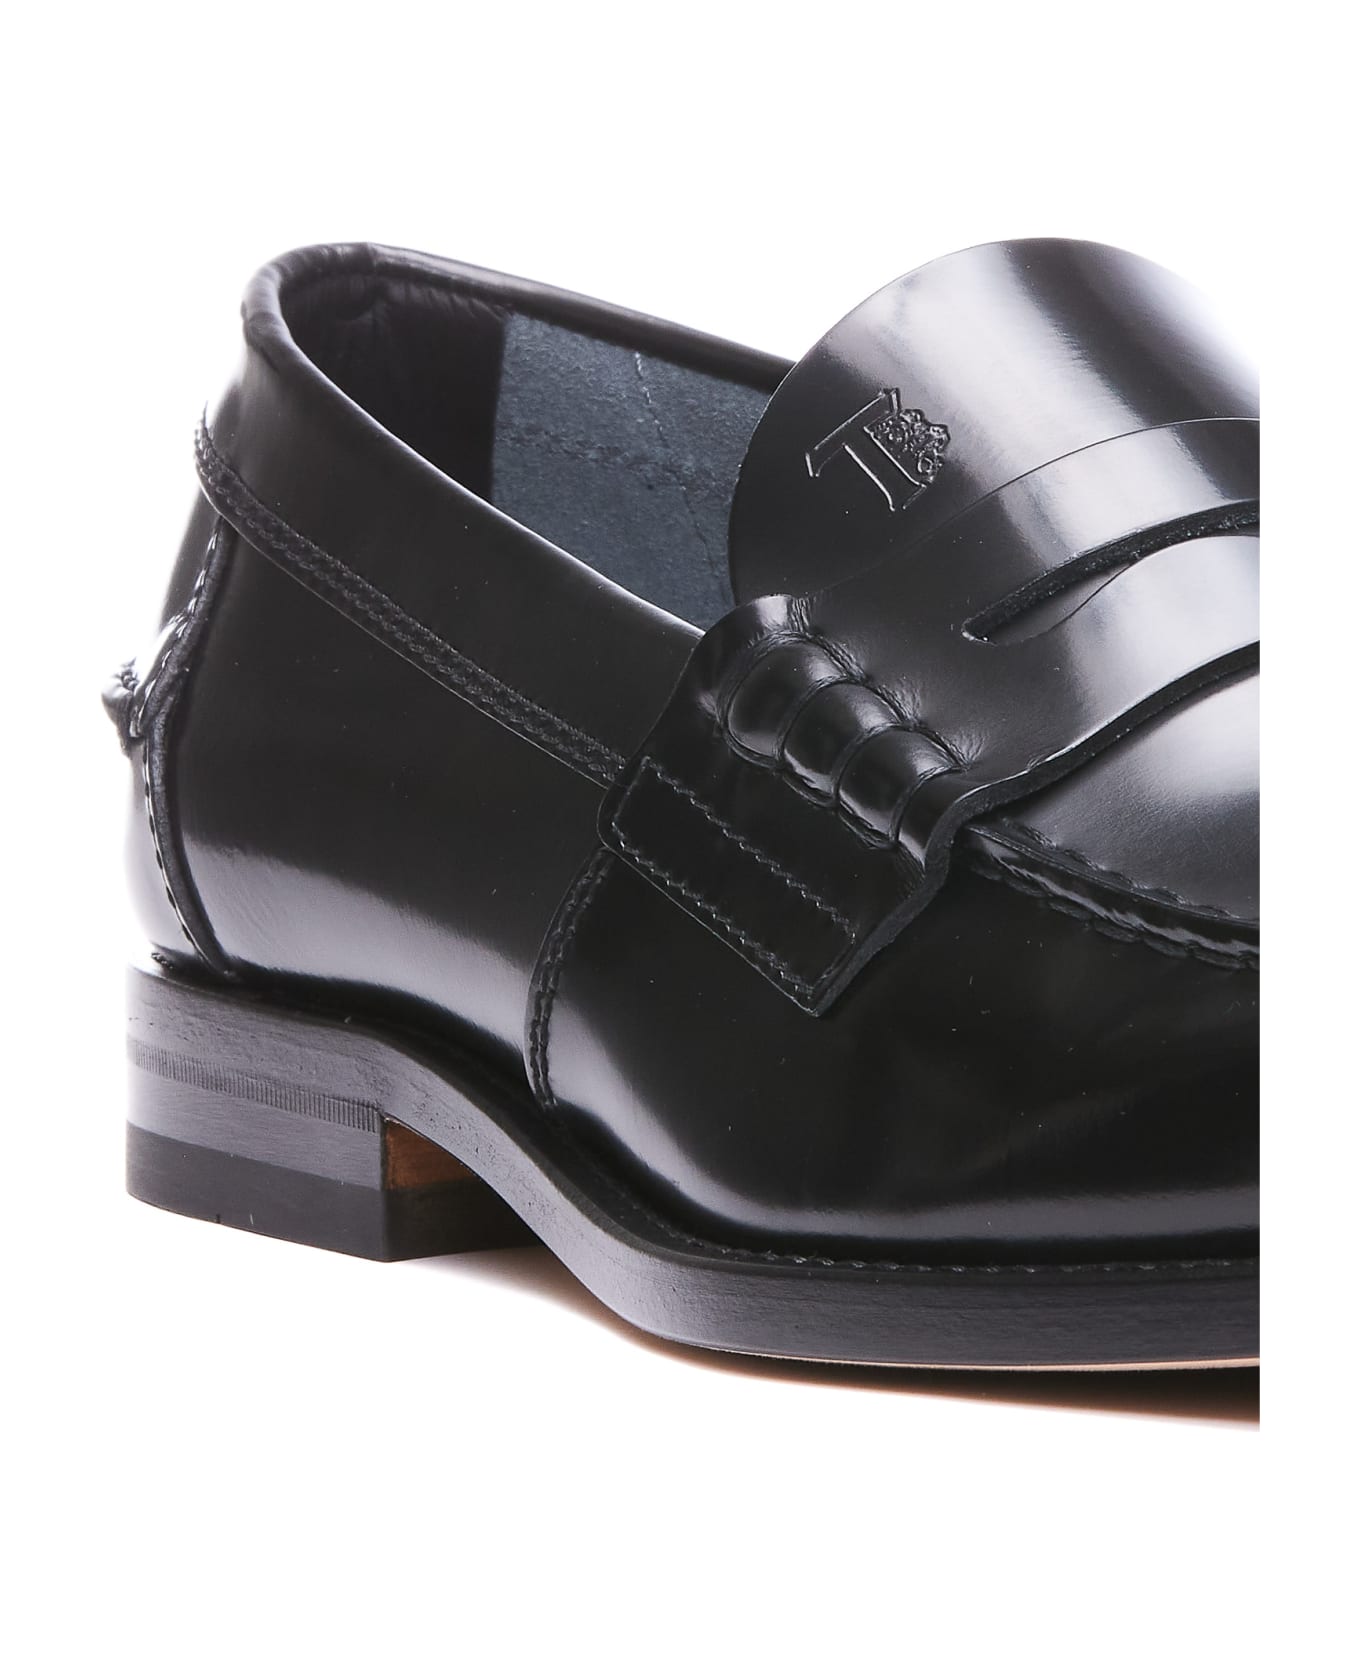 Tod's Penny Bar Loafers - Black